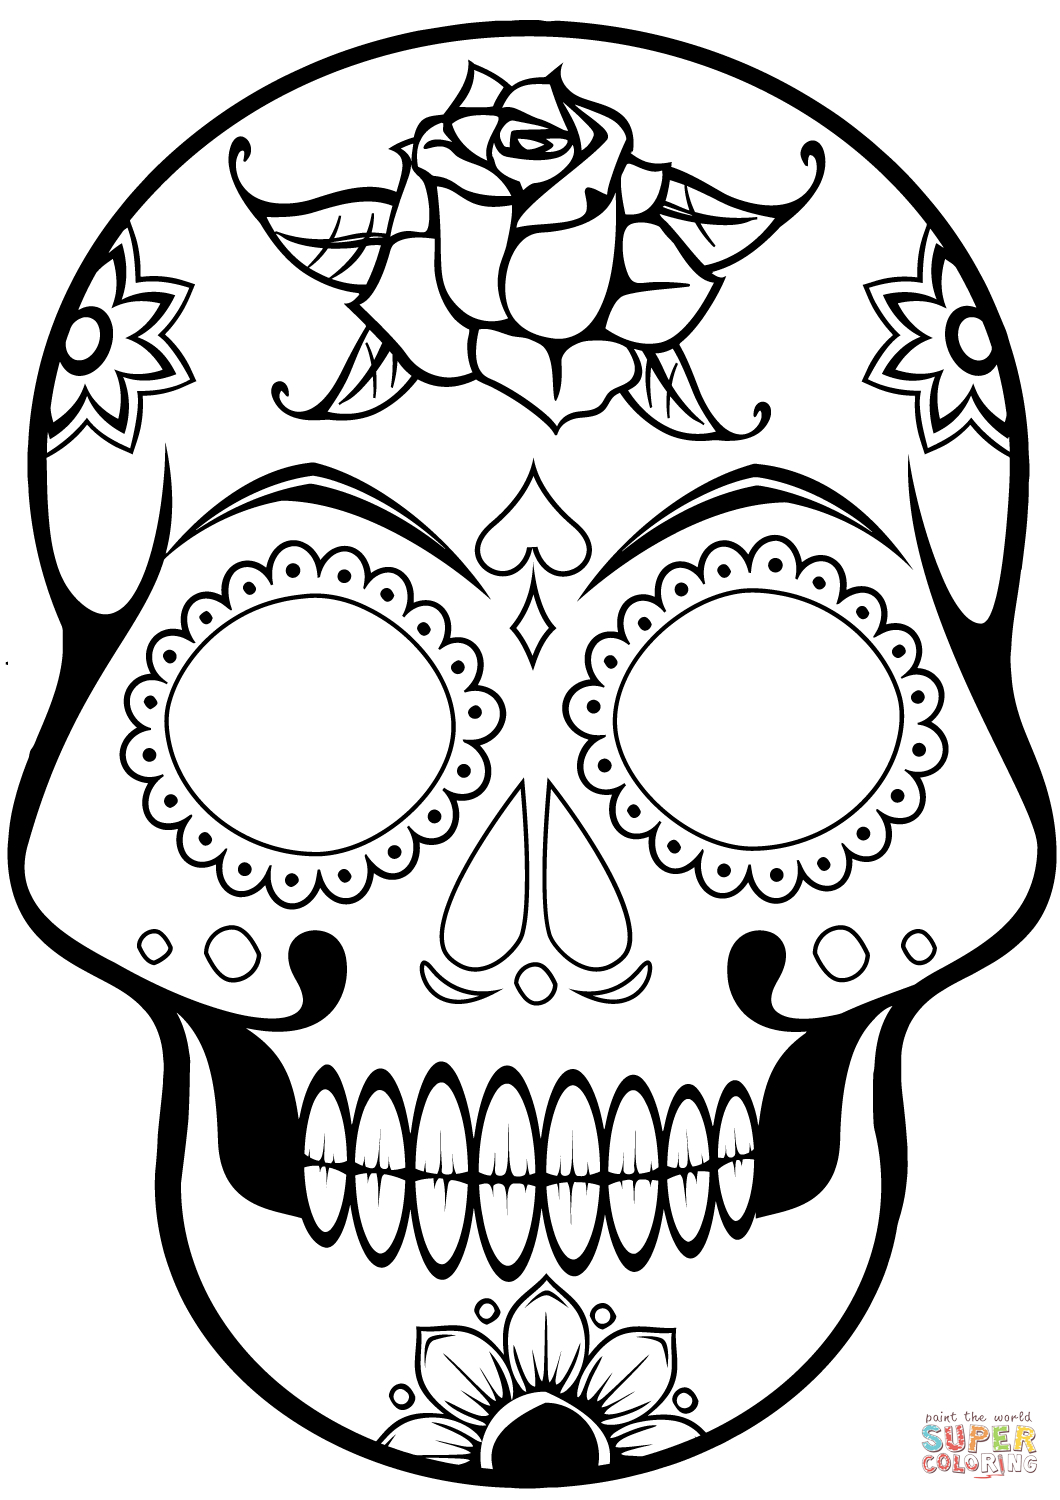 Skull Coloring Pages | Free Download Best Skull Coloring Pages On - Free Printable Sugar Skull Coloring Pages